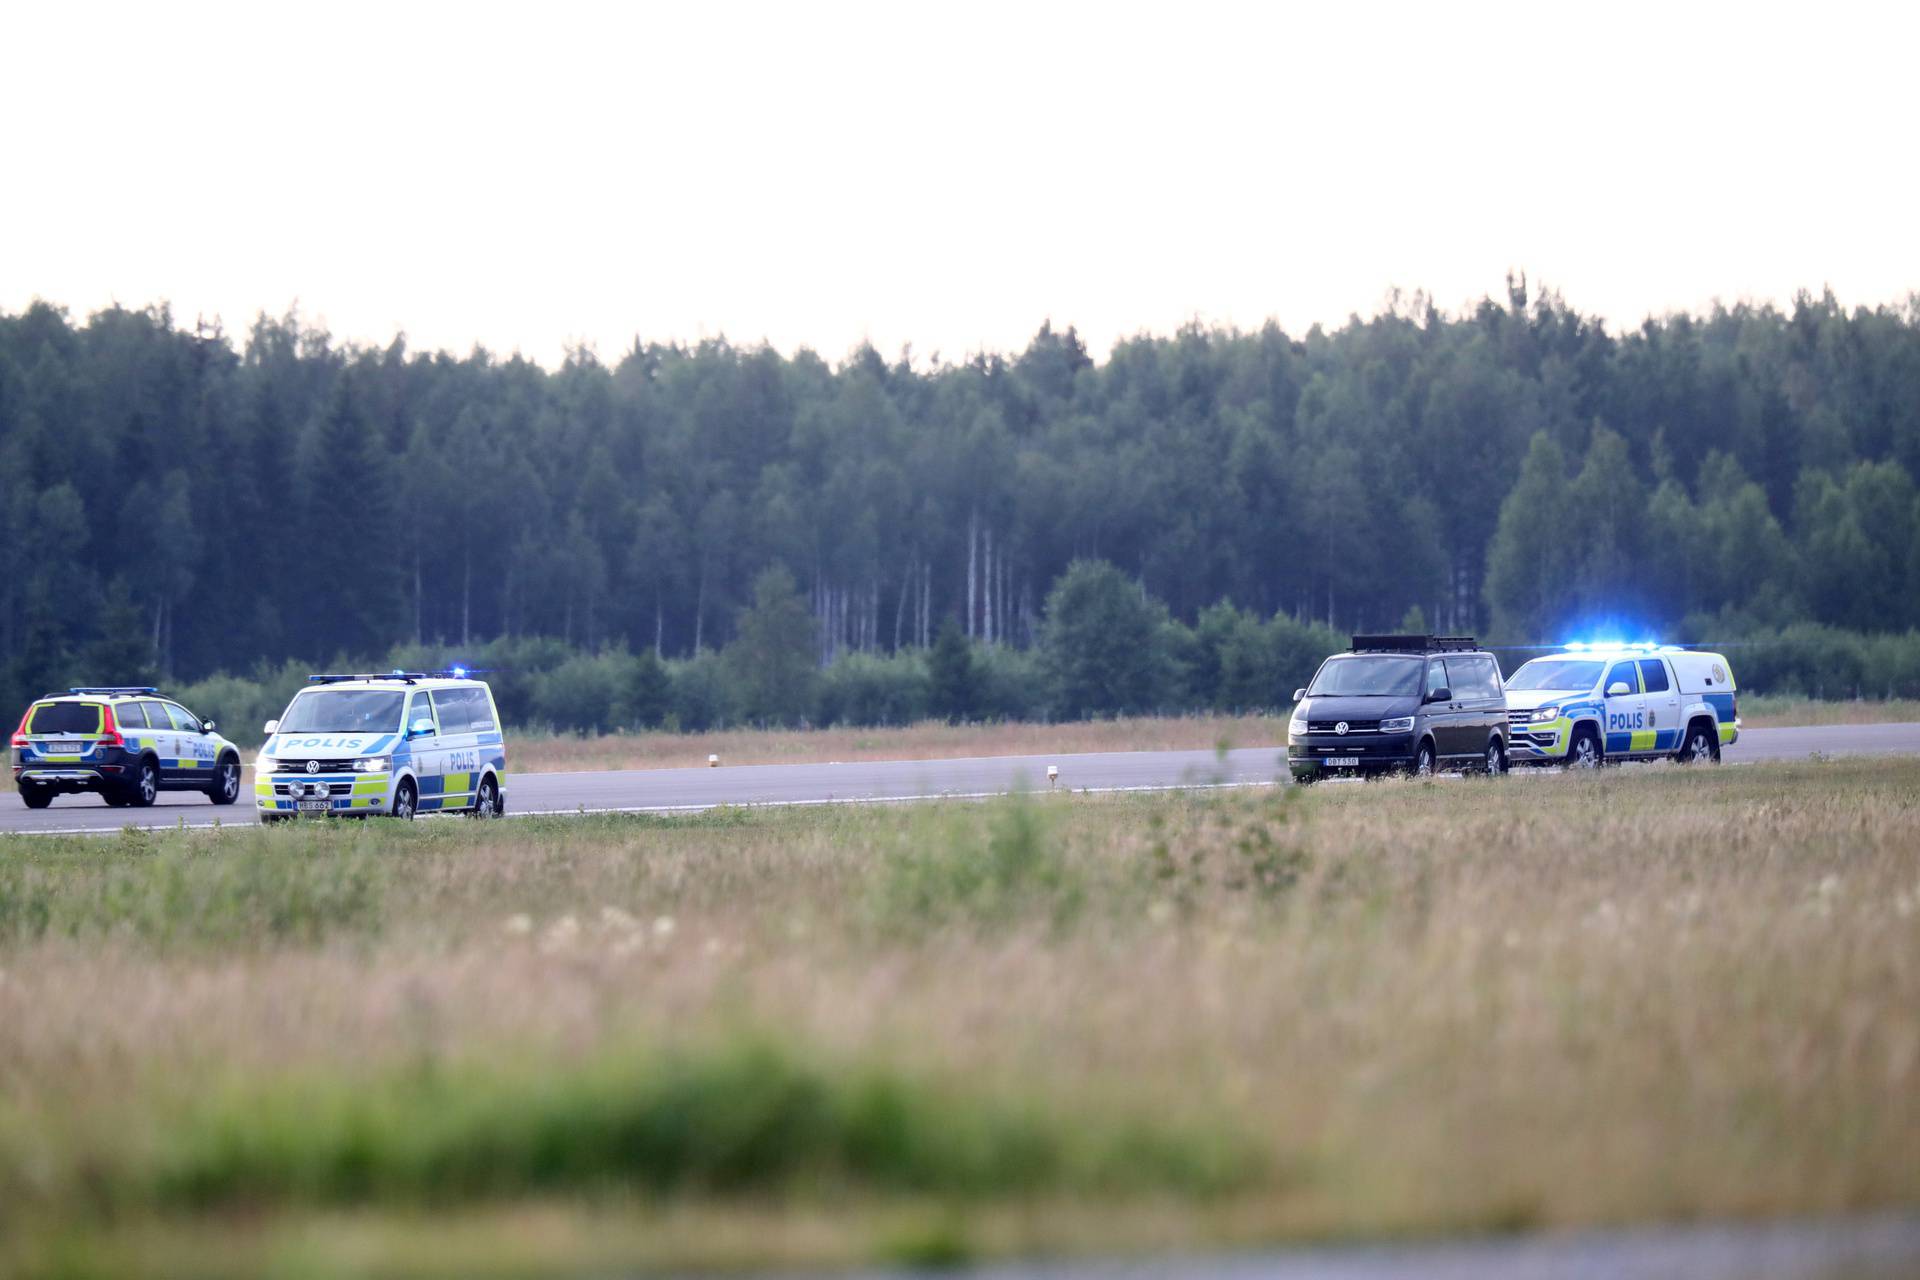 A small aircraft is seen after crashing at Orebro Airport in Sweden